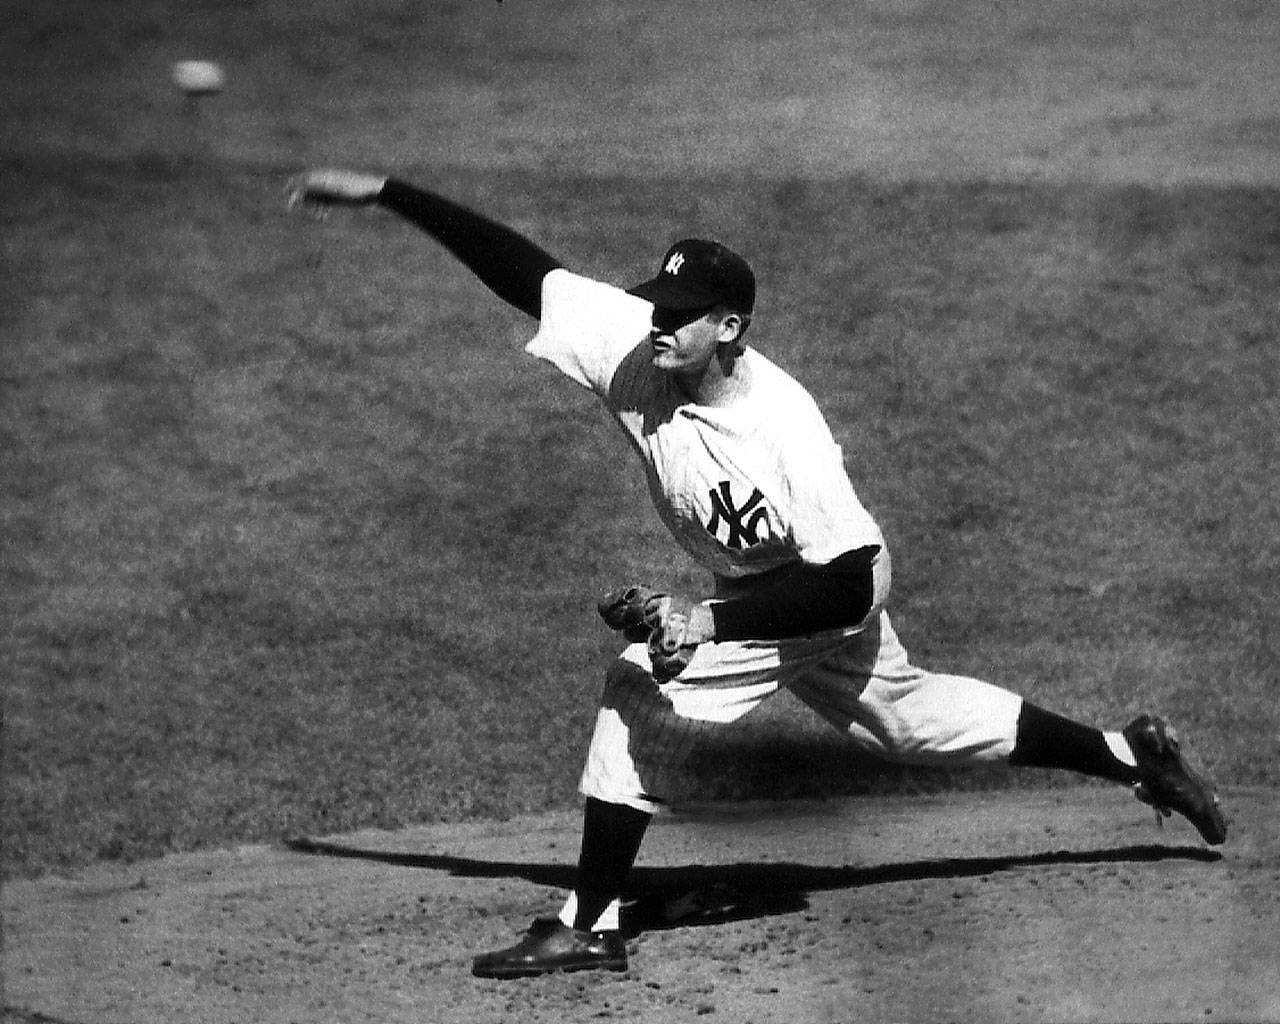 Don Larsen fires a pitch en route to the only perfect game in a World Series to date as the New York Yankees beat the Brooklyn Dodgers in Game 5, 2-0, on Oct. 8, 1956. (Associated Press)